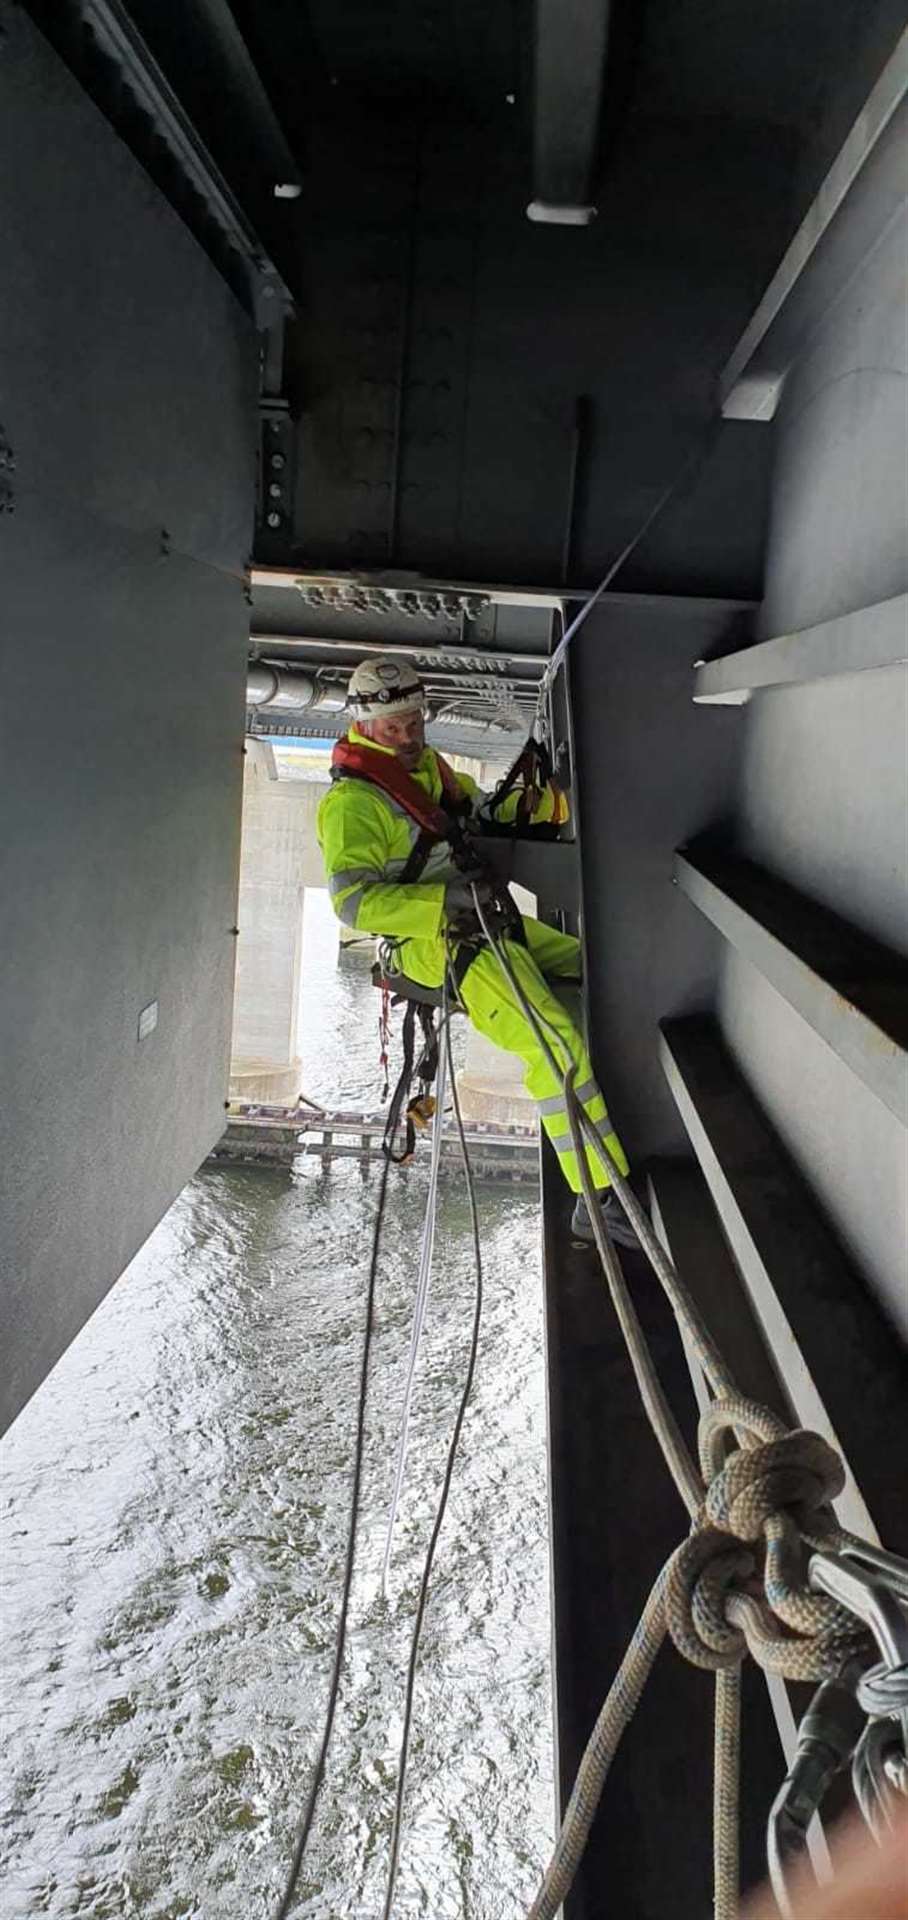 One of the specialists at work for Scottish Water under Kessock Bridge.